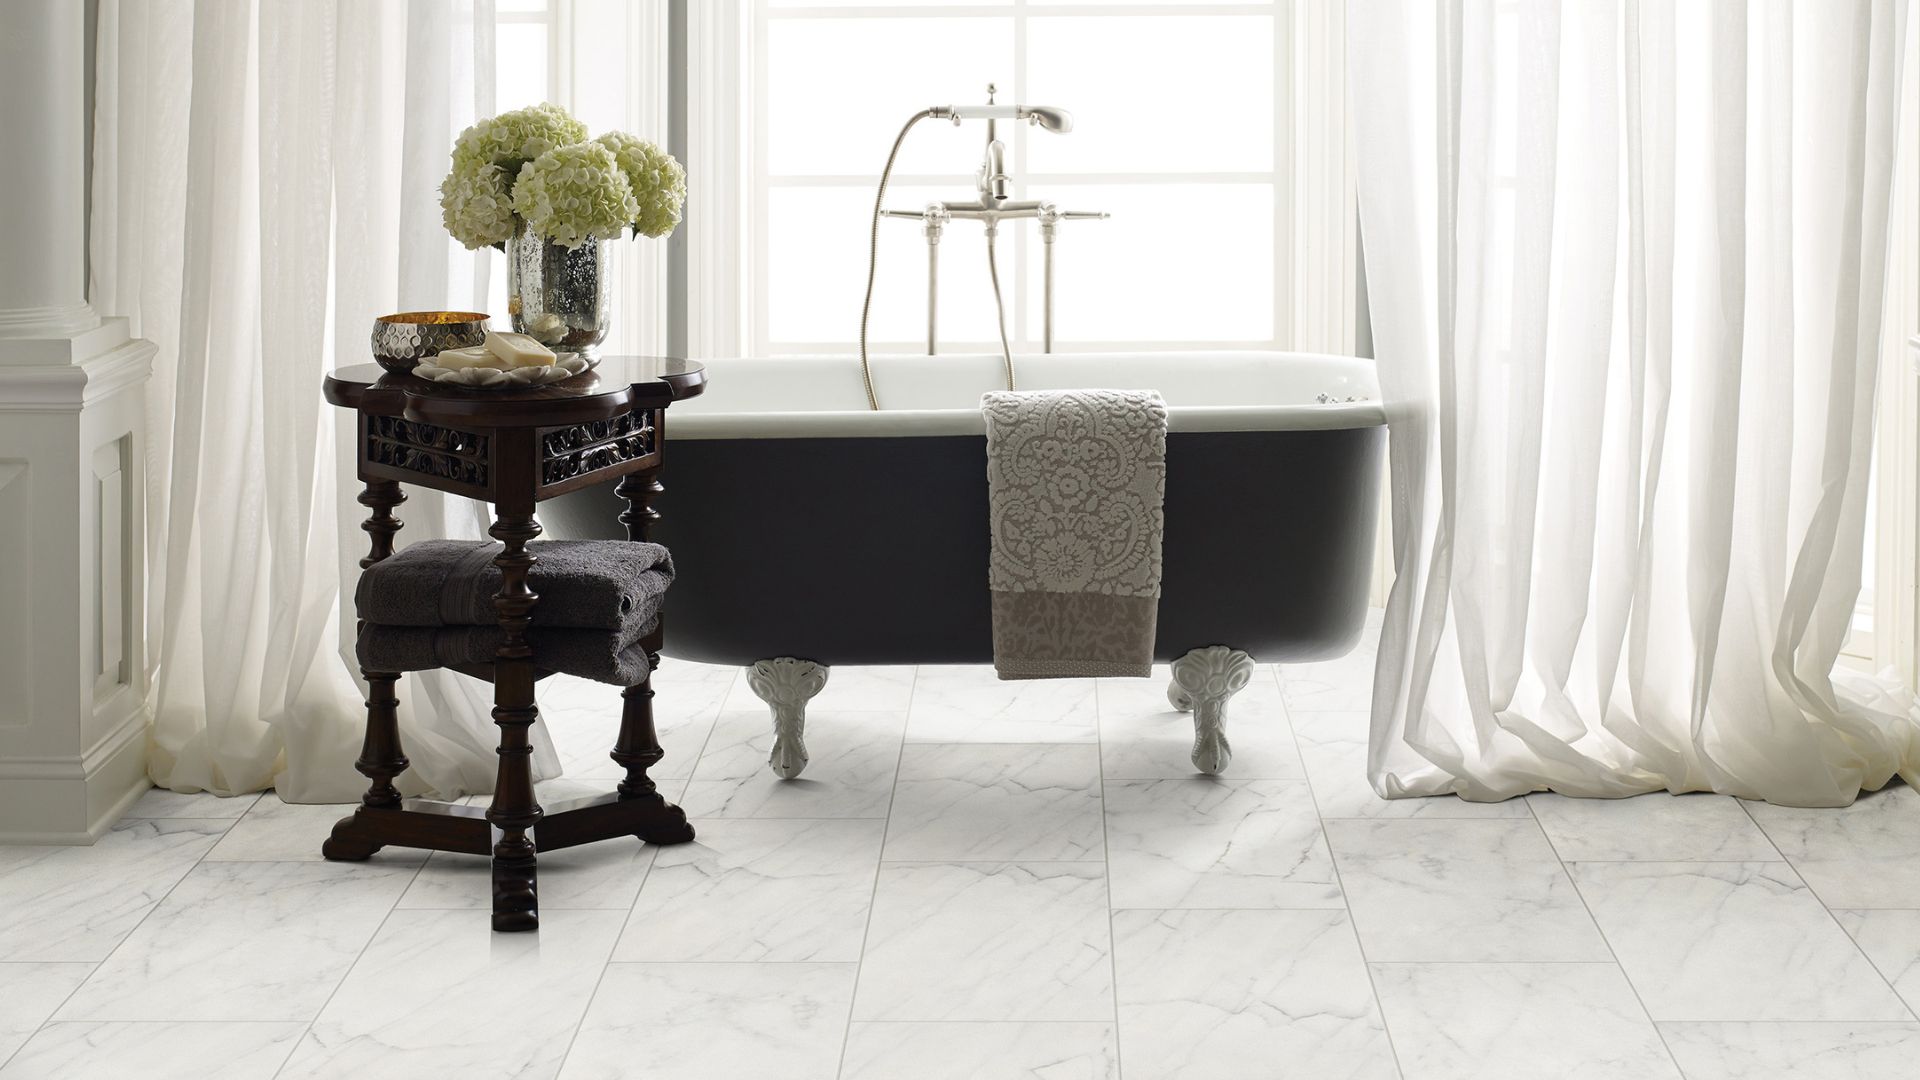 tile flooring in a bright white bathroom with a standalone tub